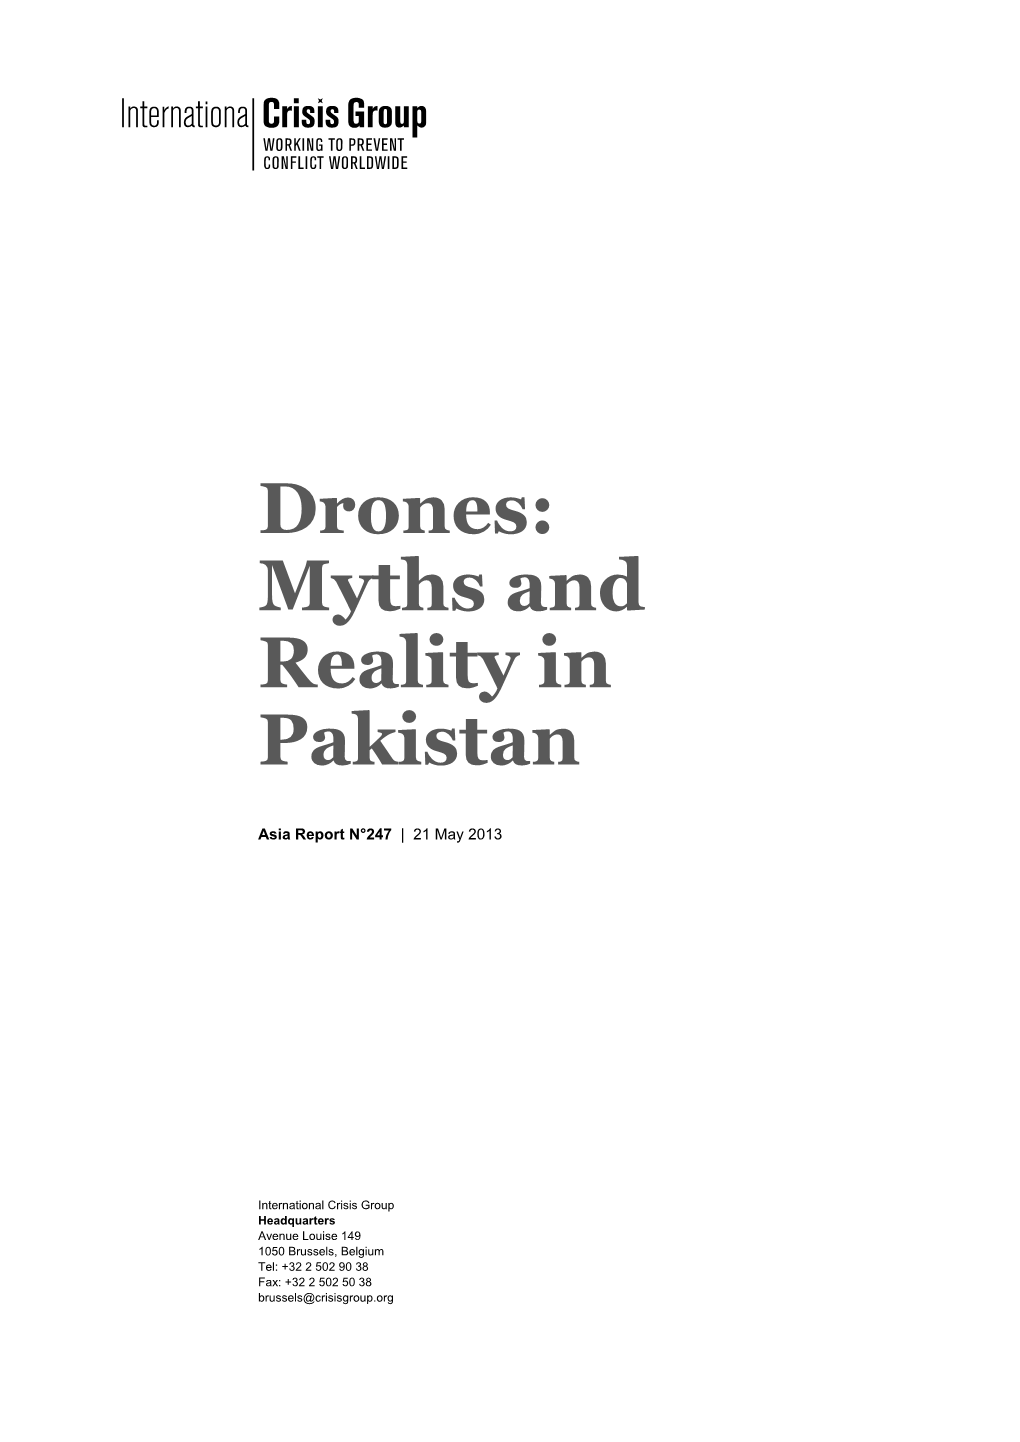 Drones: Myths and Reality in Pakistan